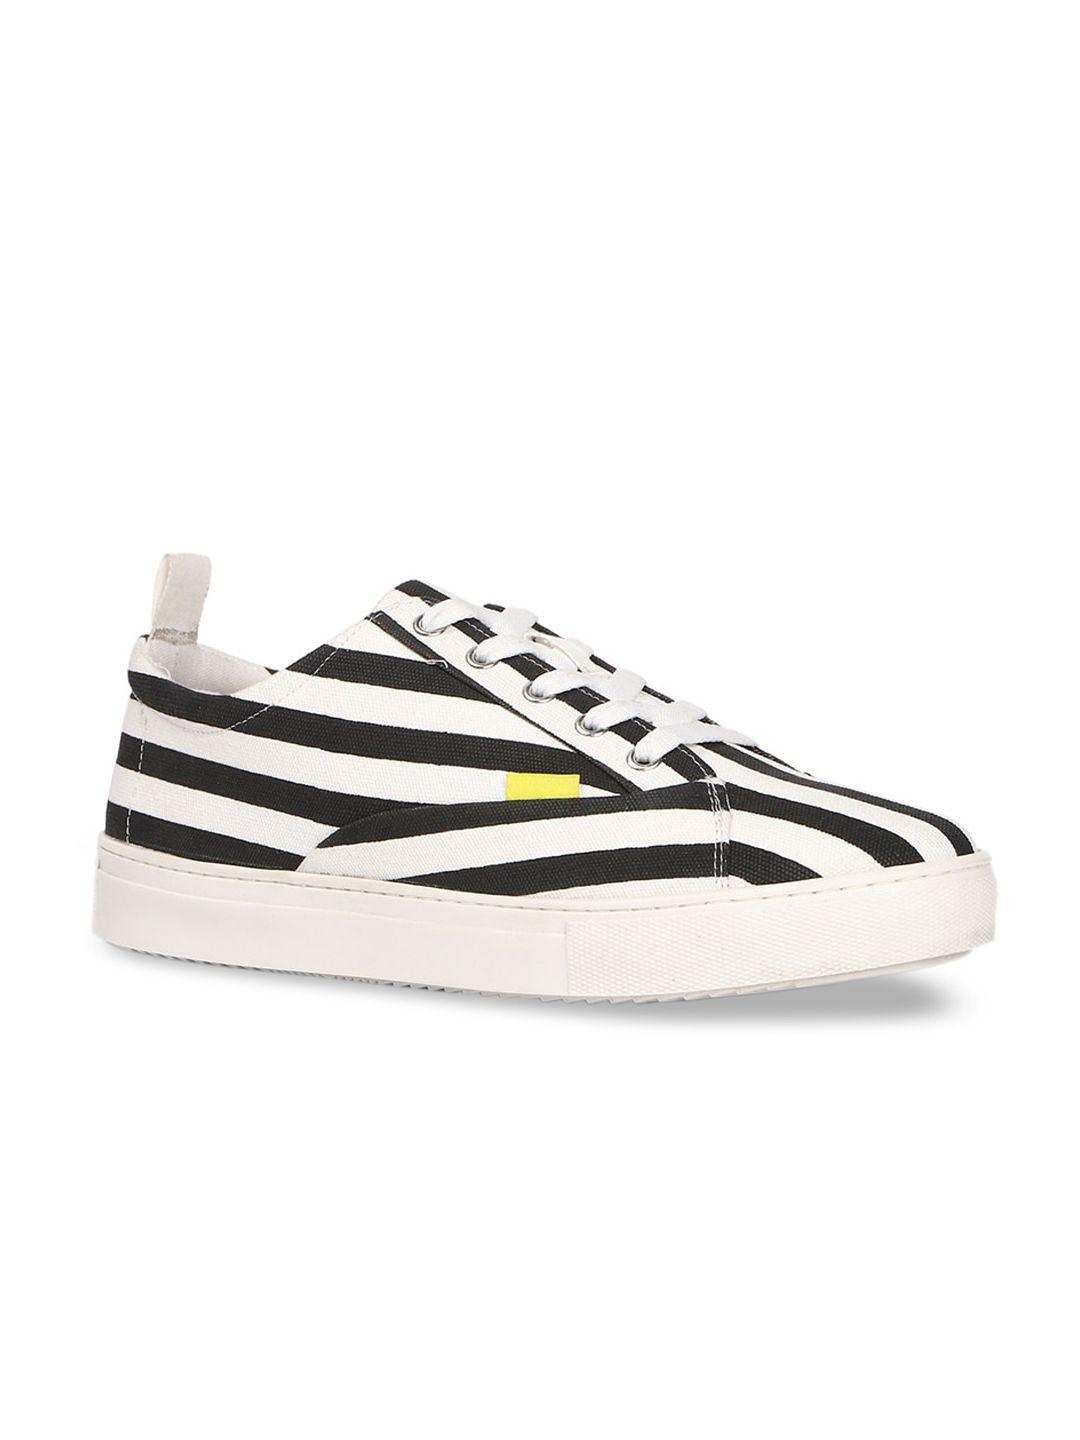 forever-21-men-white-&-black-striped-pu-sneakers-casual-shoes